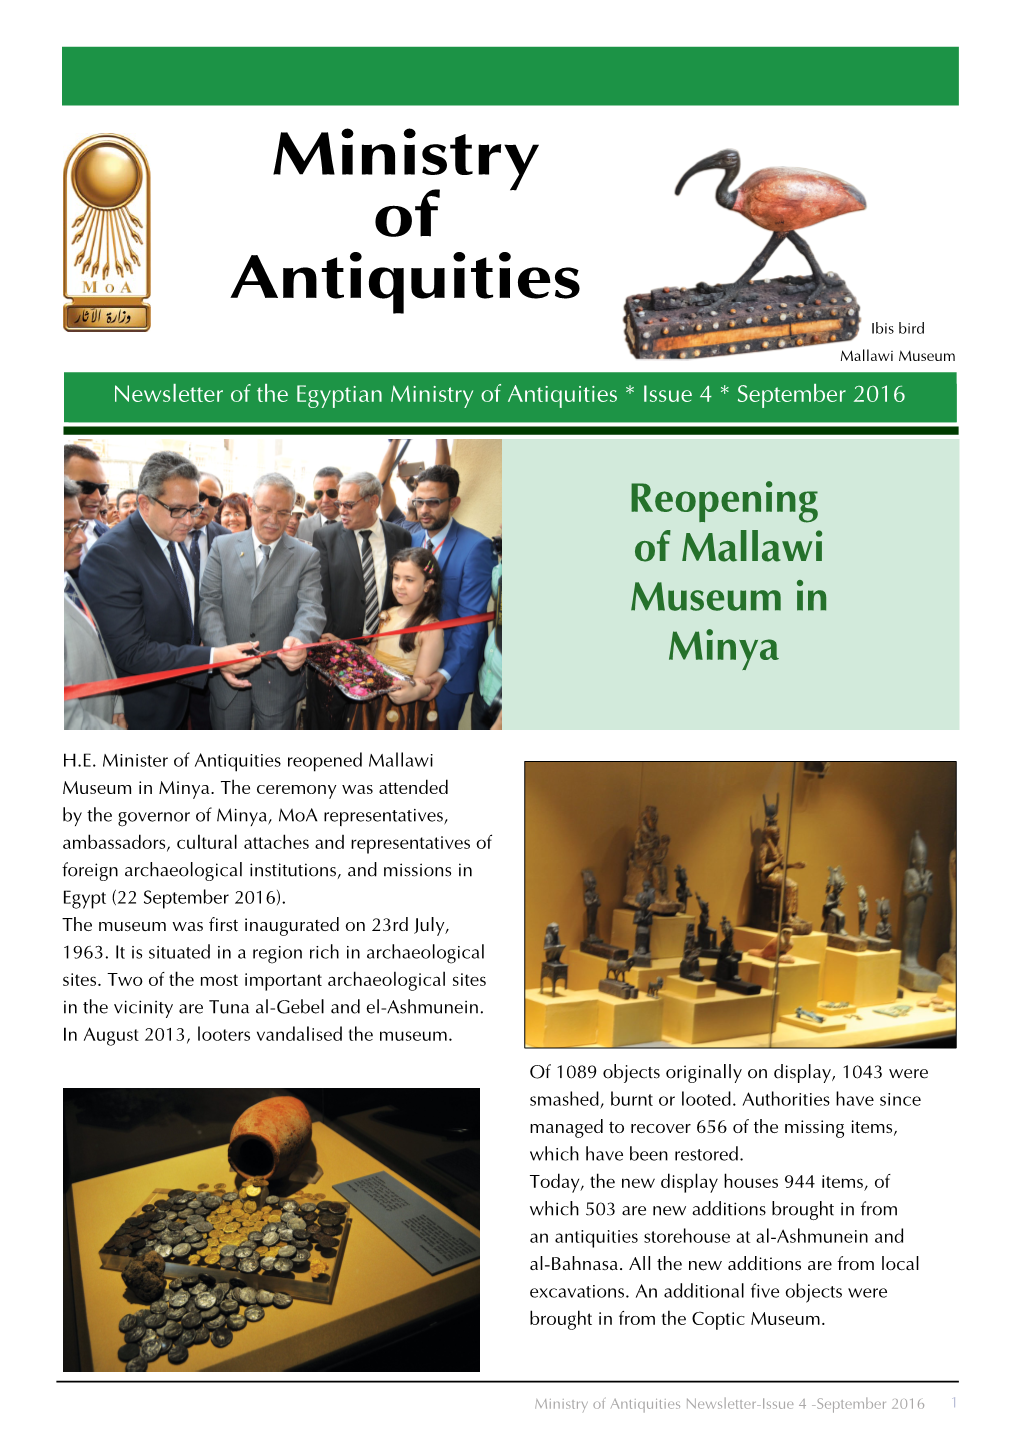 Ministry of Antiquities Ibis Bird Mallawi Museum Newsletter of the Egyptian Ministry of Antiquities * Issue 4 * September 2016